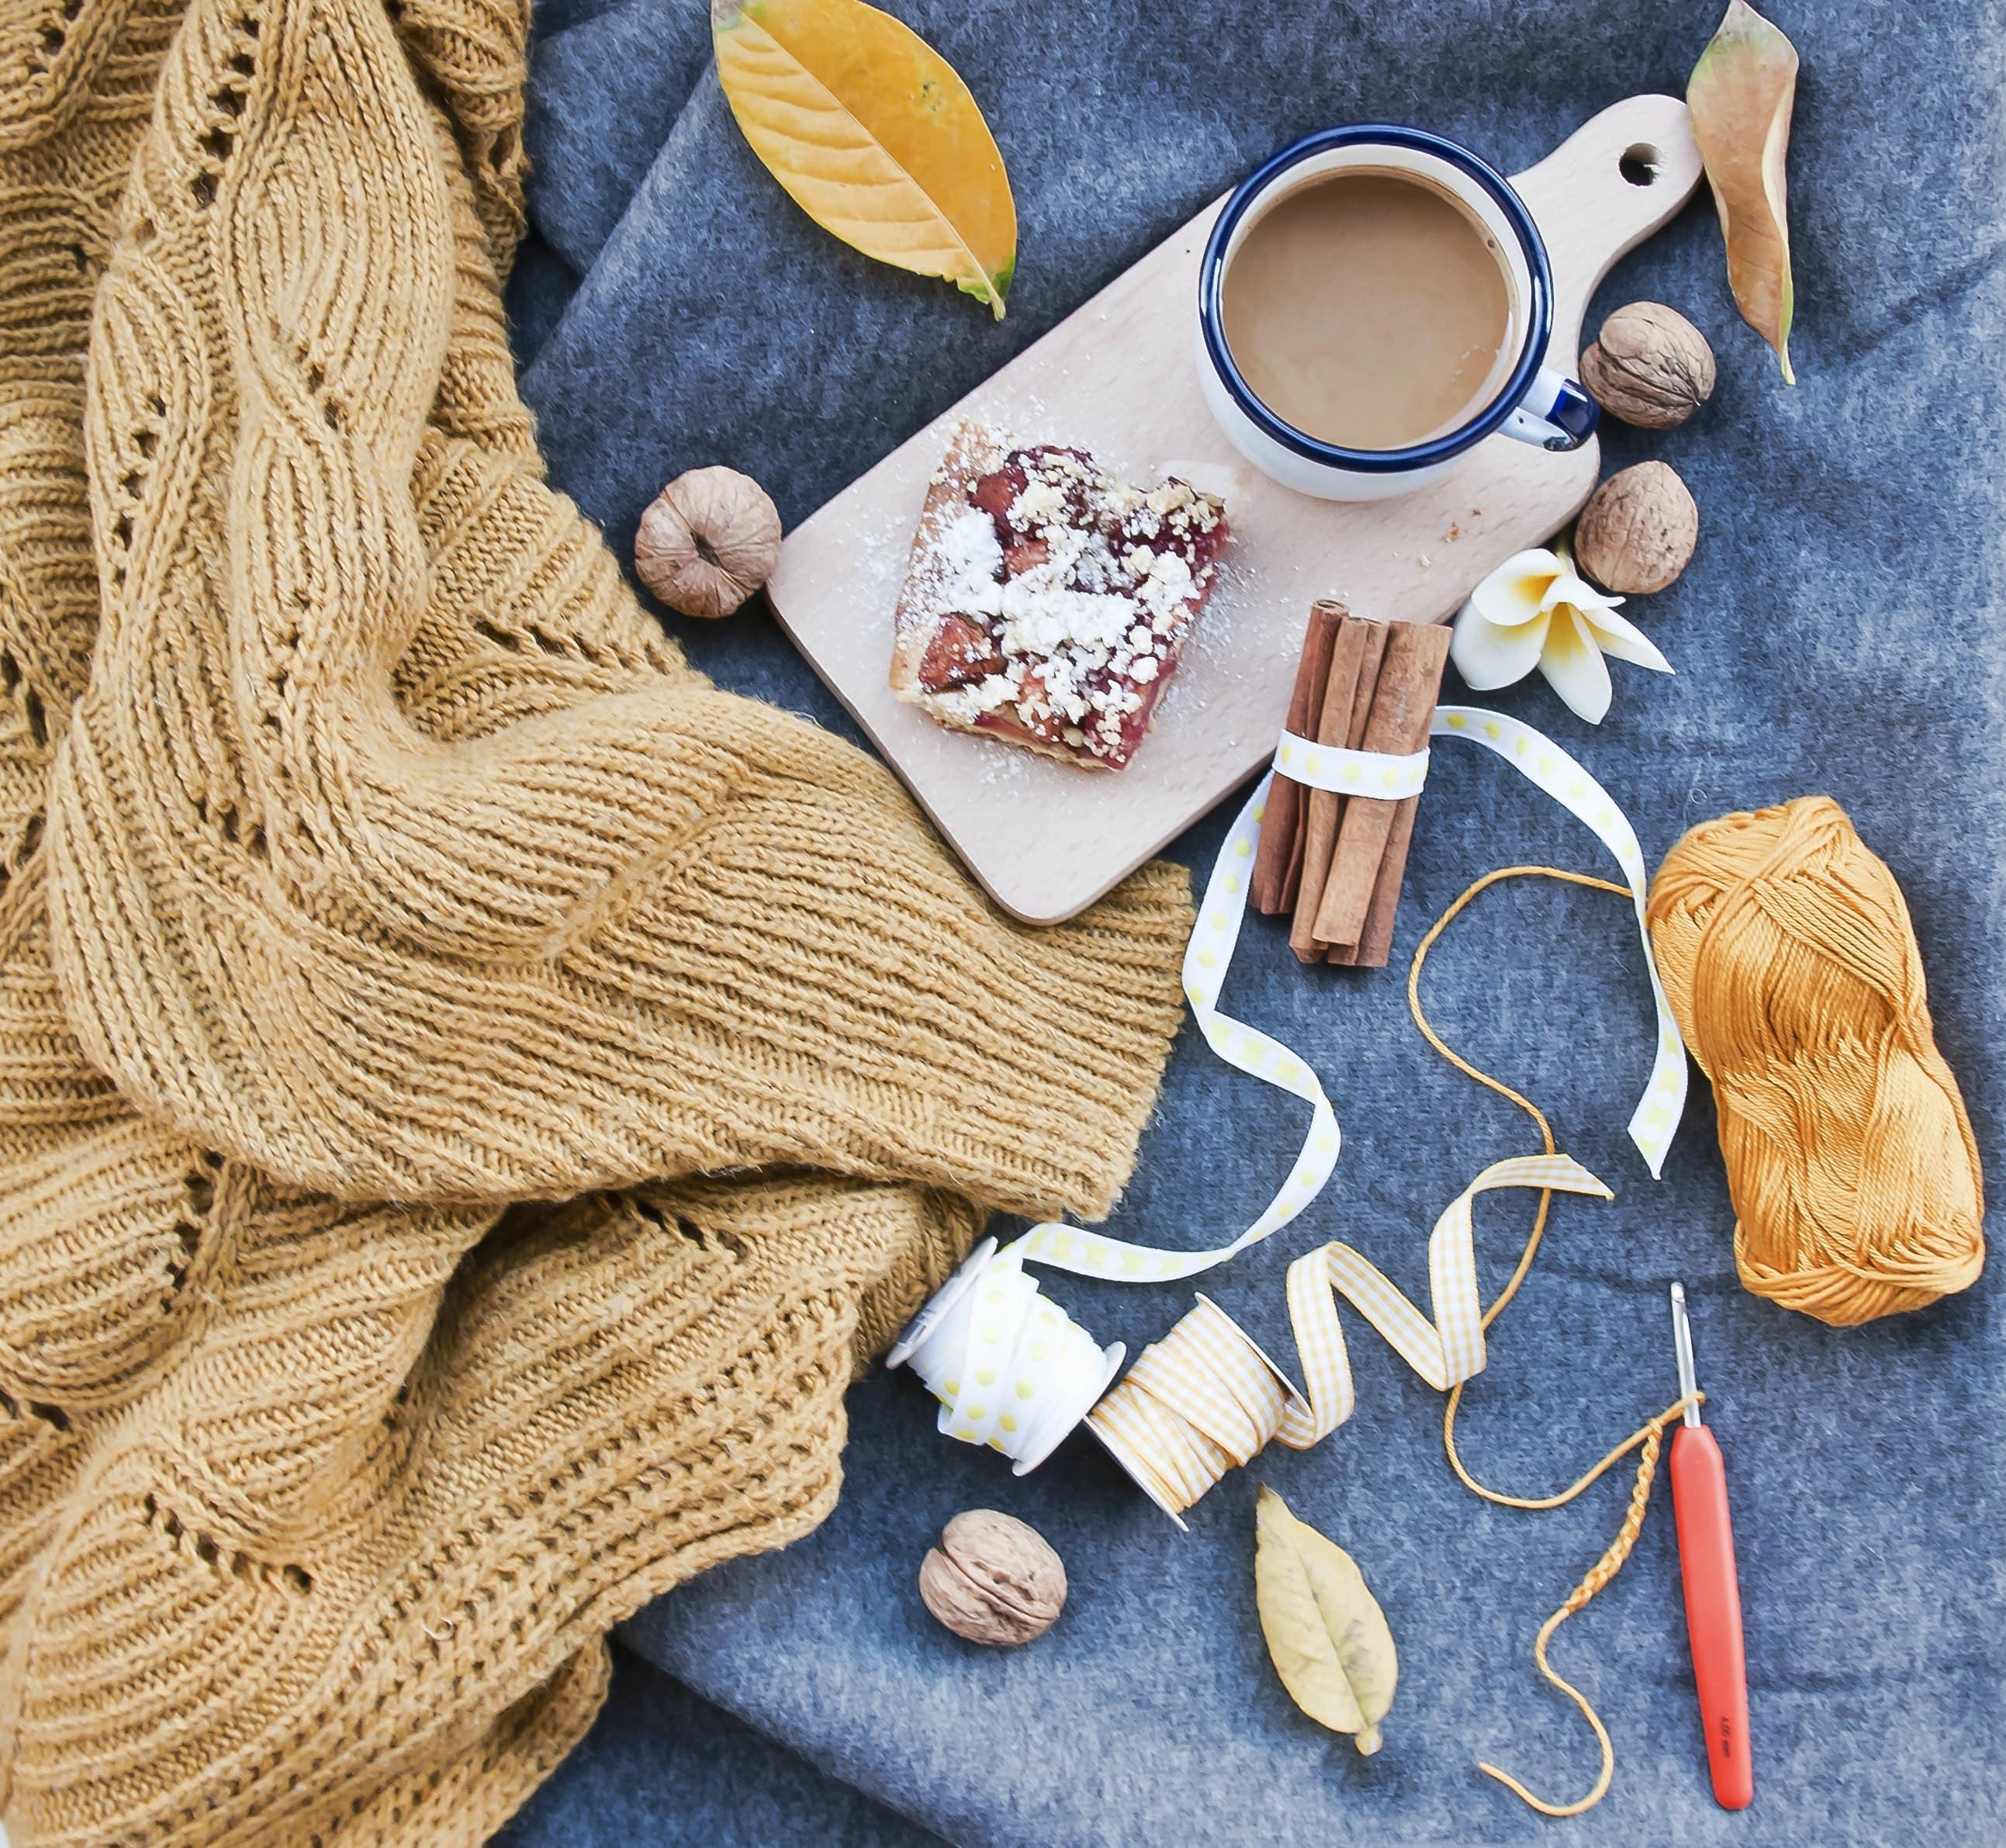 A blue felt surface with a beige sweater, gold yan, white and cream ribbon, crochet hook, and fall treats